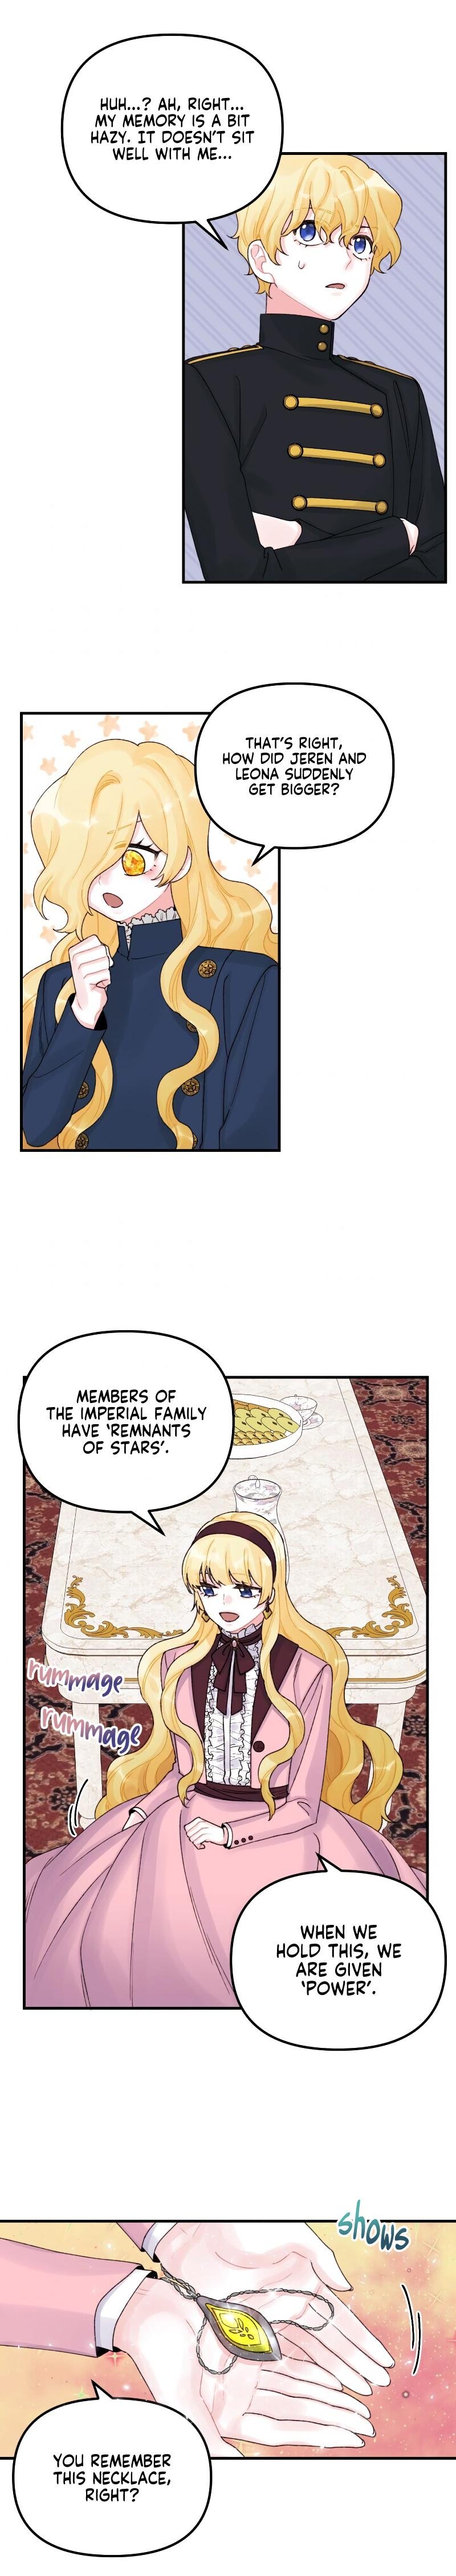 the-princess-in-the-dumpster-chap-33-1